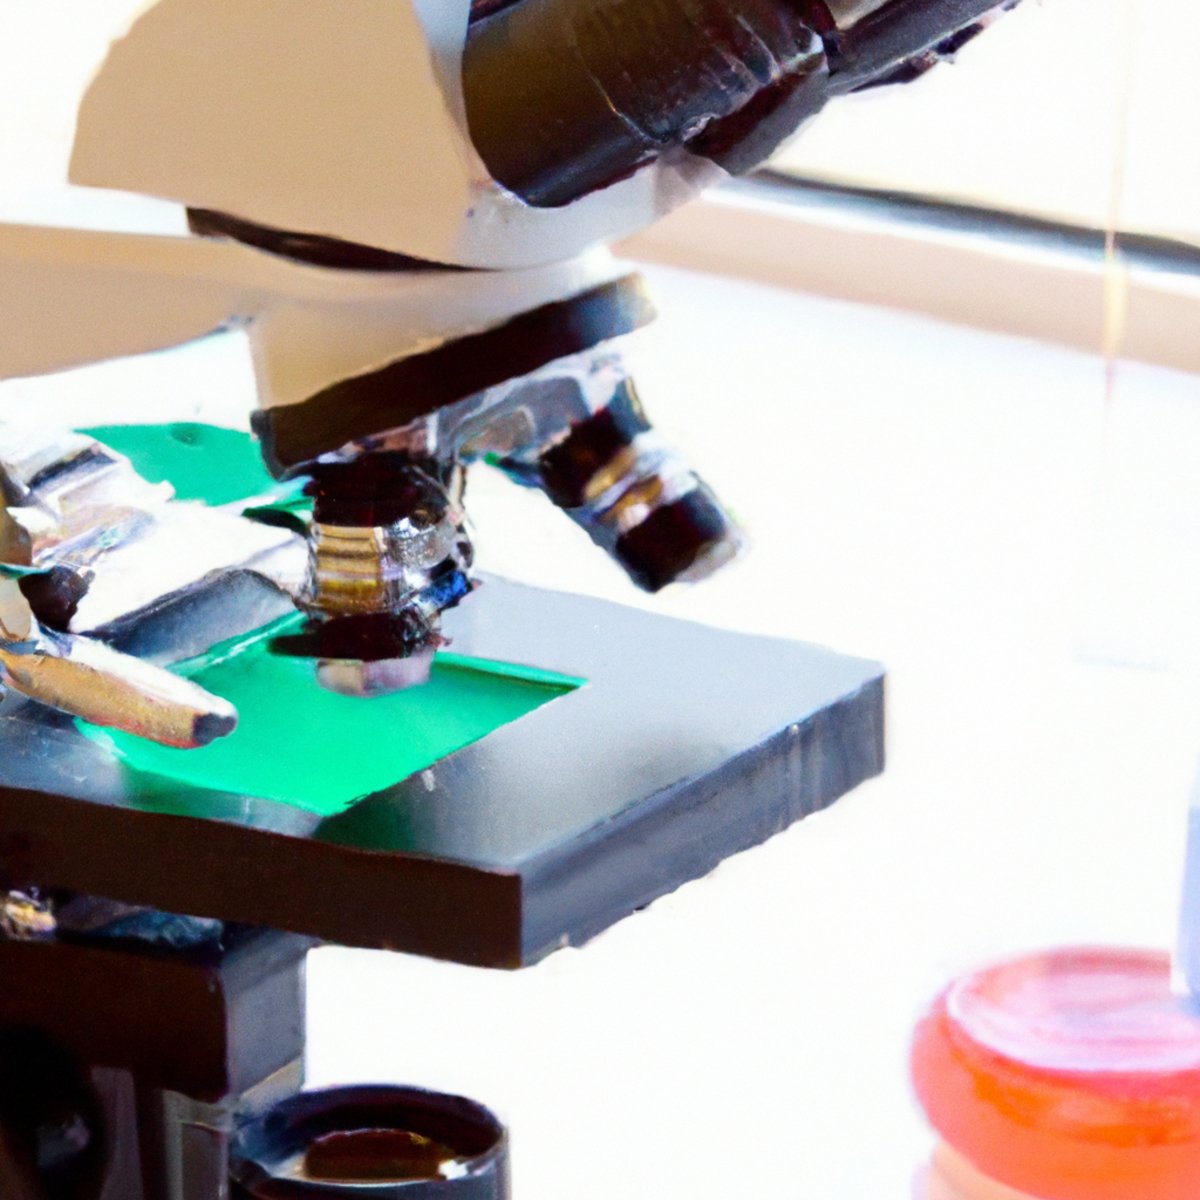 Medical laboratory with scientific equipment and microscope displaying cells, emphasizing Erdheim-Chester Disease research.